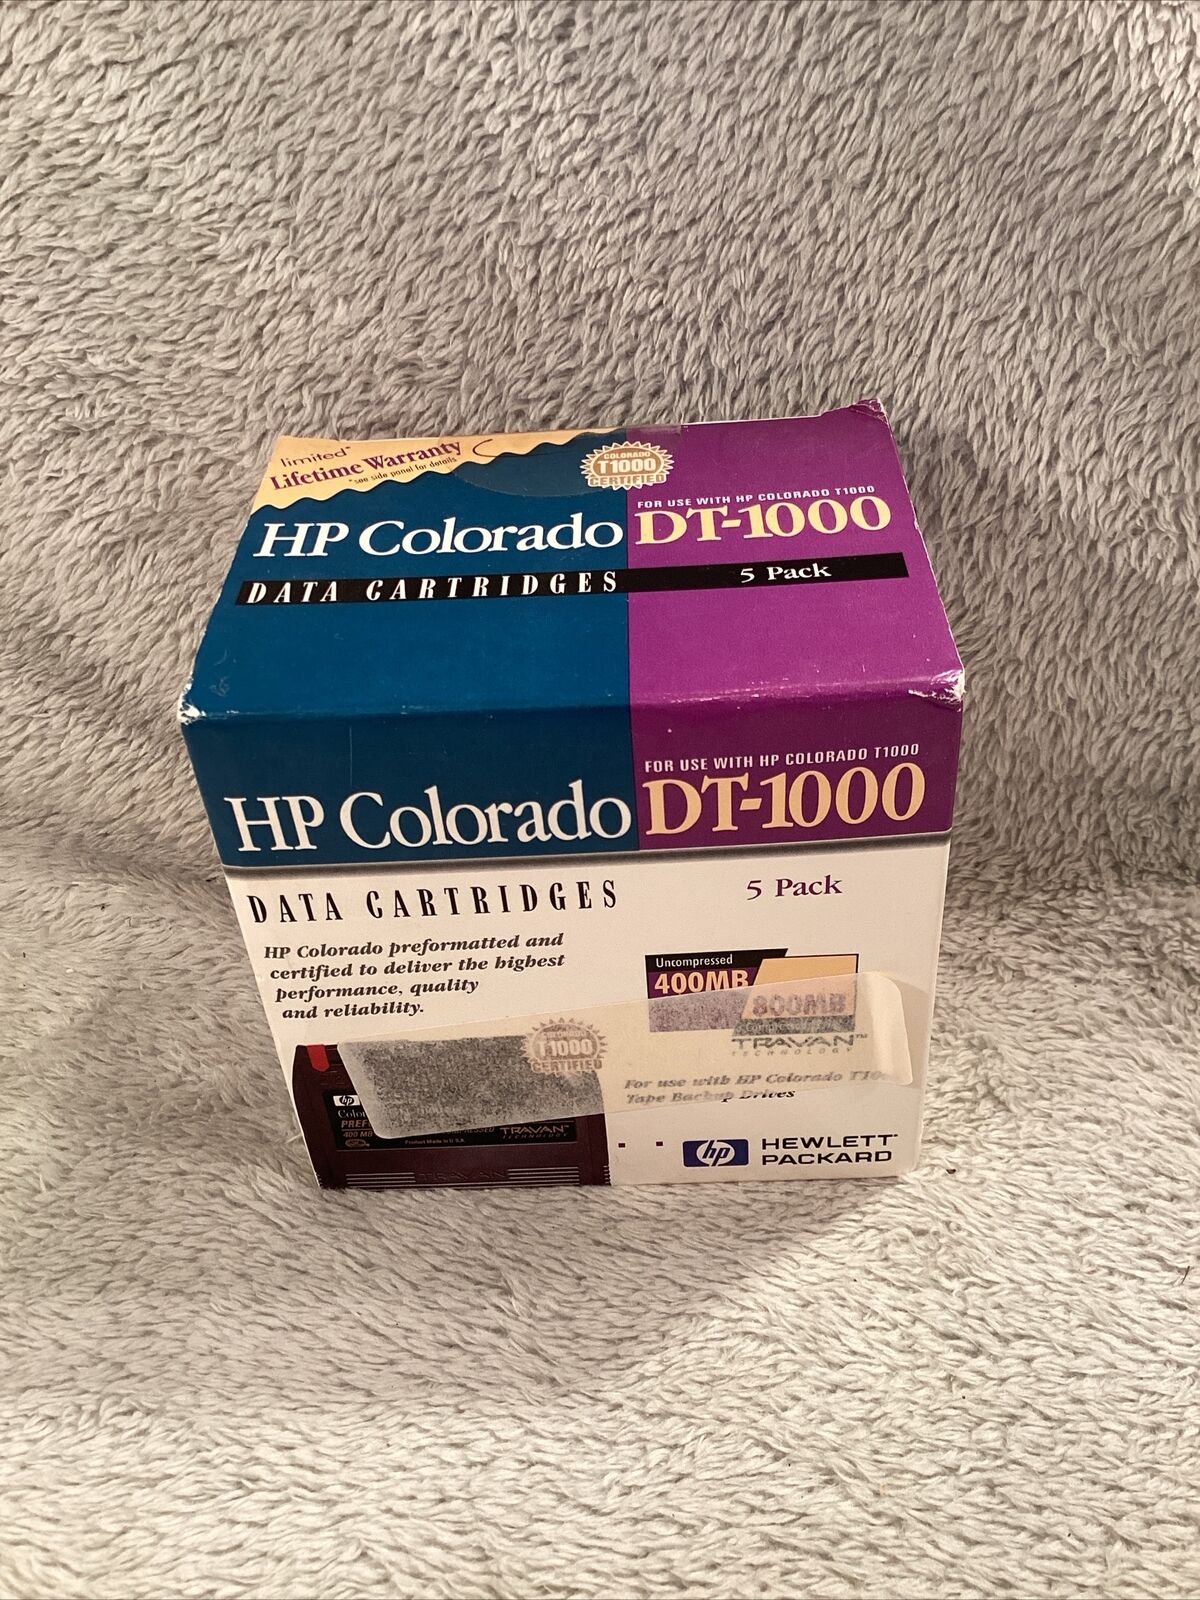 HP Colorado DT-1000 5 Pack Data Cartridges For HP Colorado 1000 Sealed